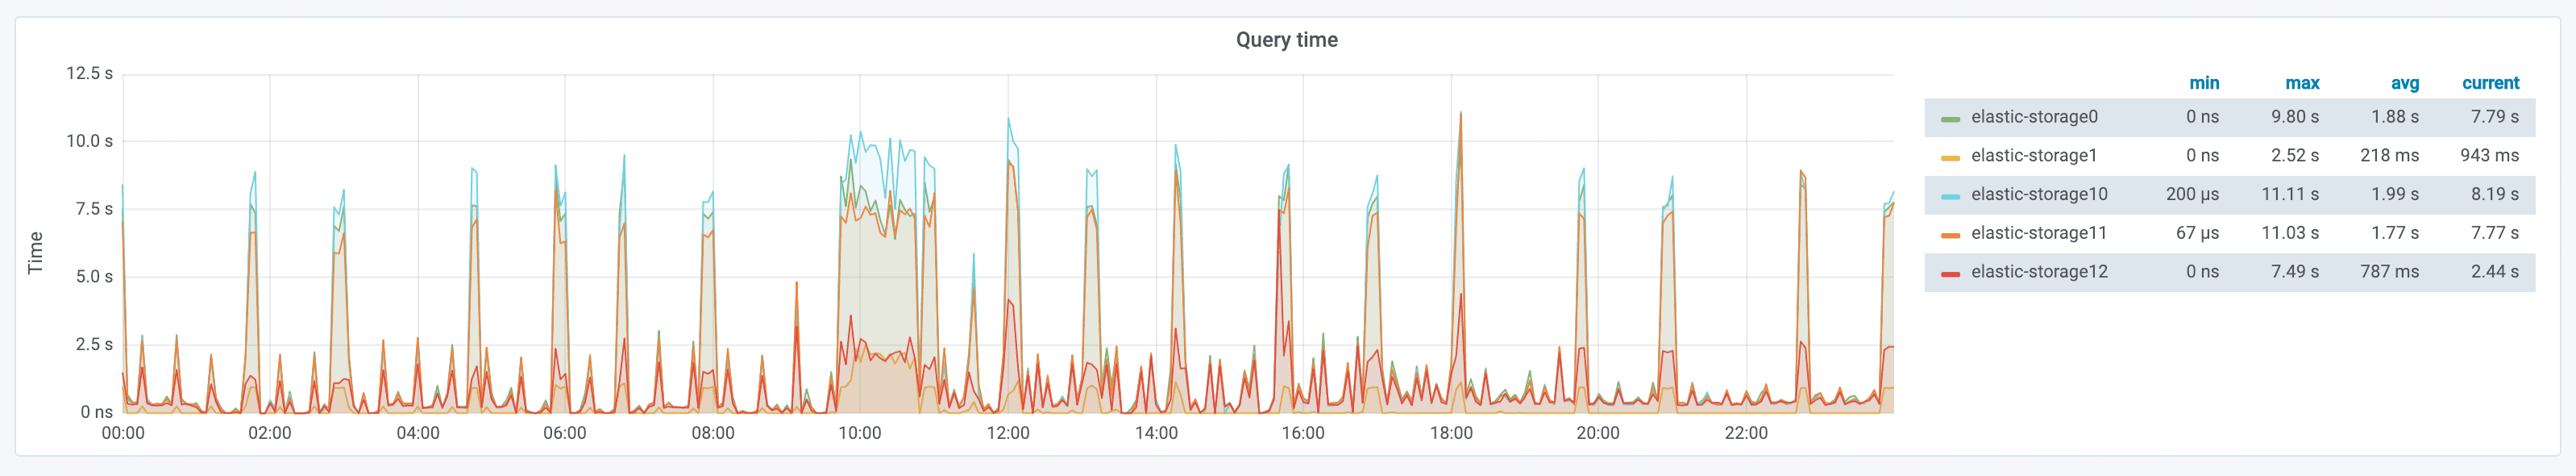 Periodic spikes in Elasticsearch response times